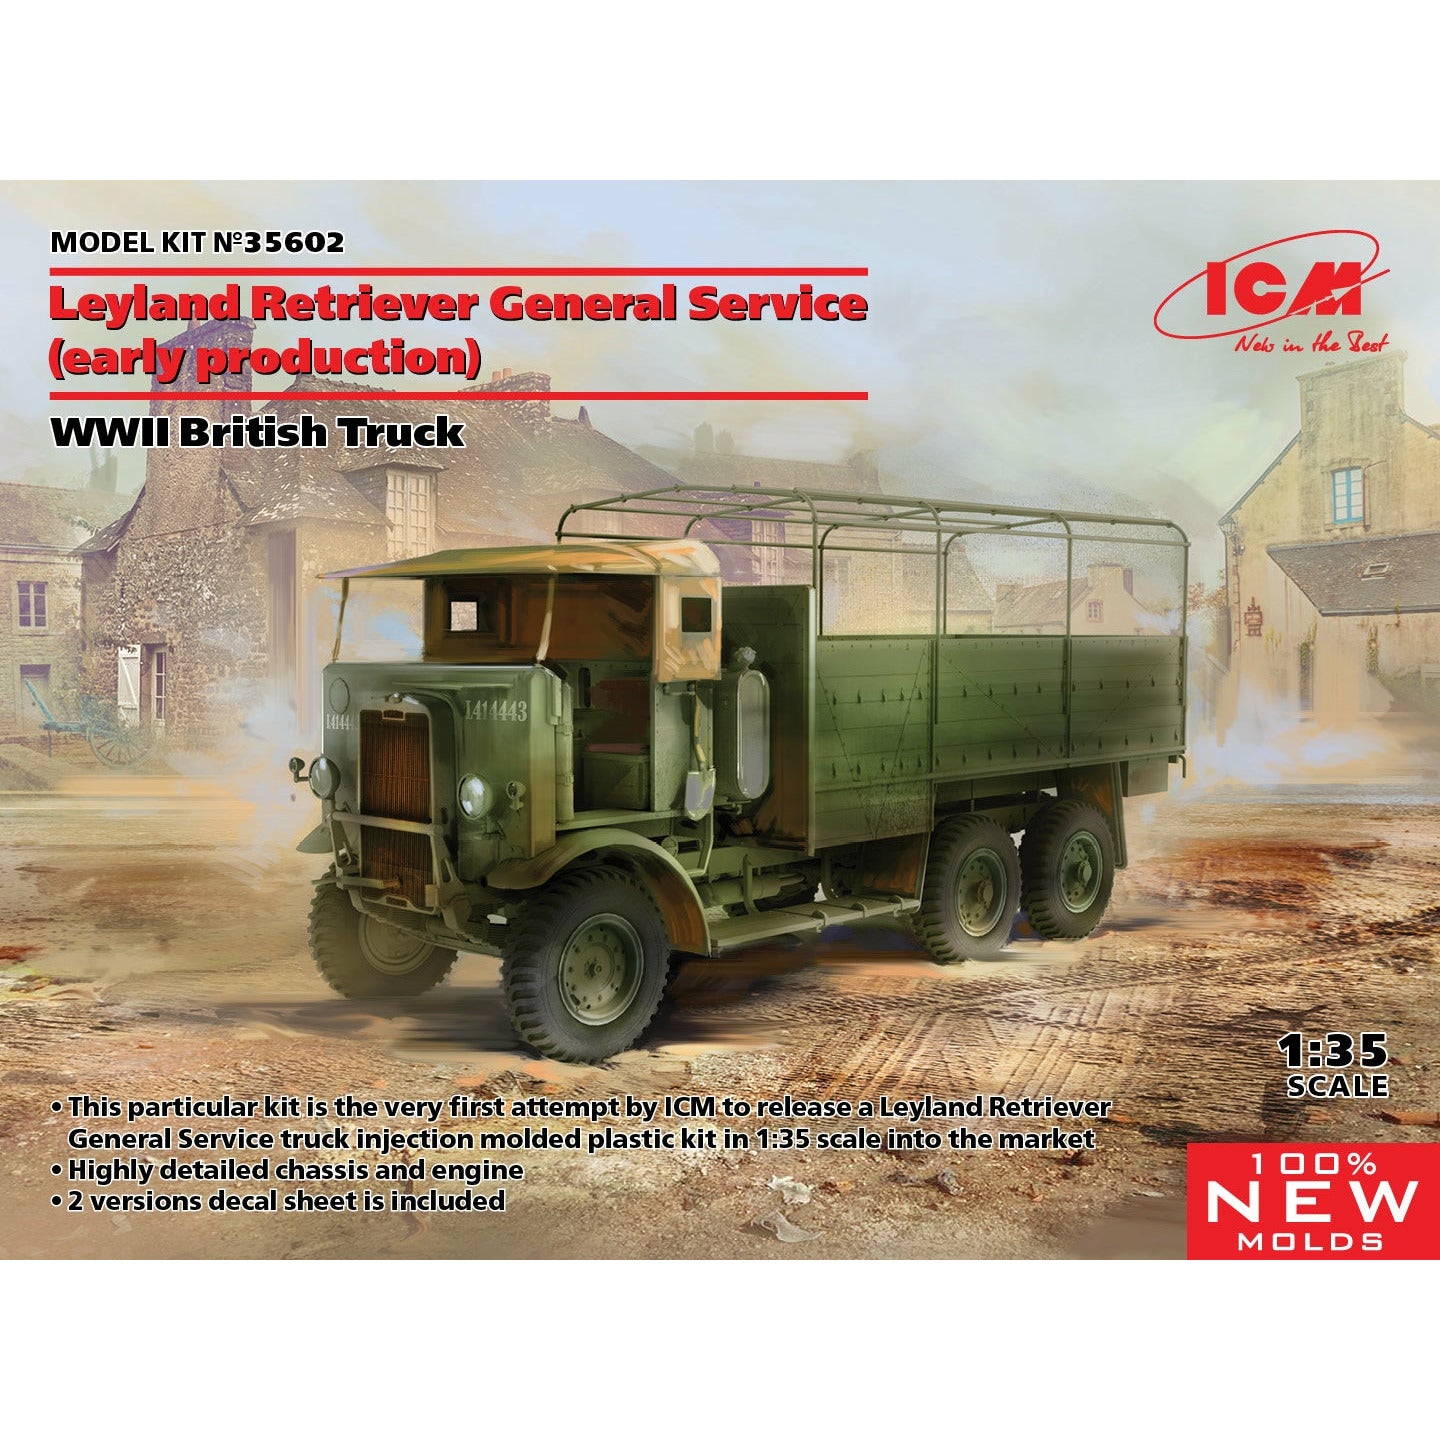 Leyland Retriever General Service Early Production - WWII British Truck 1/35 #35602 by ICM